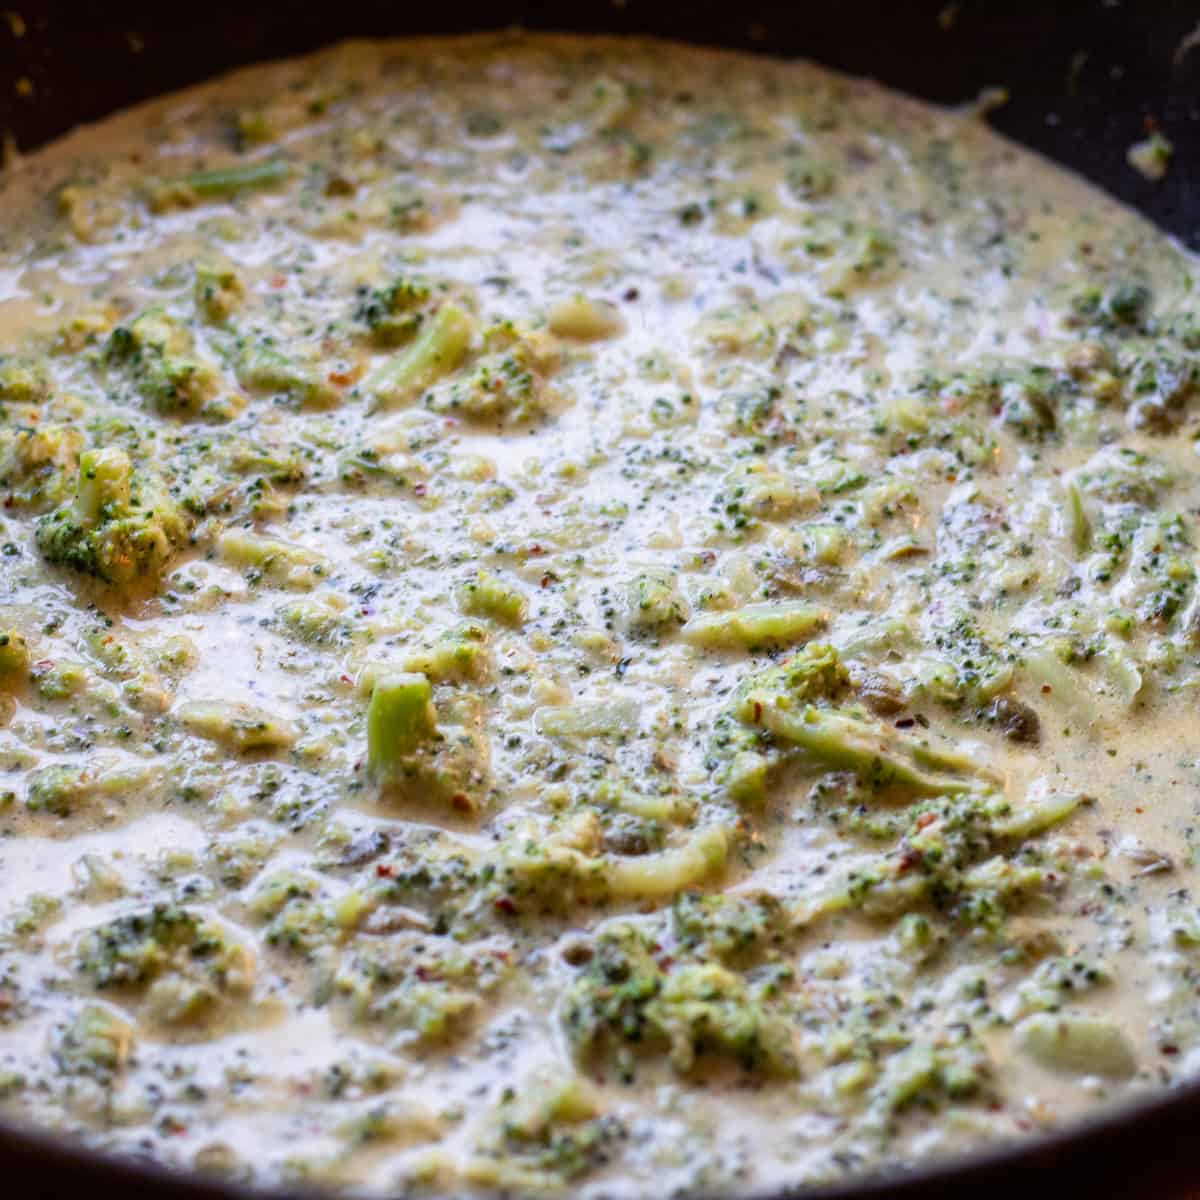 cook the broccoli few more minutes in creamy sauce